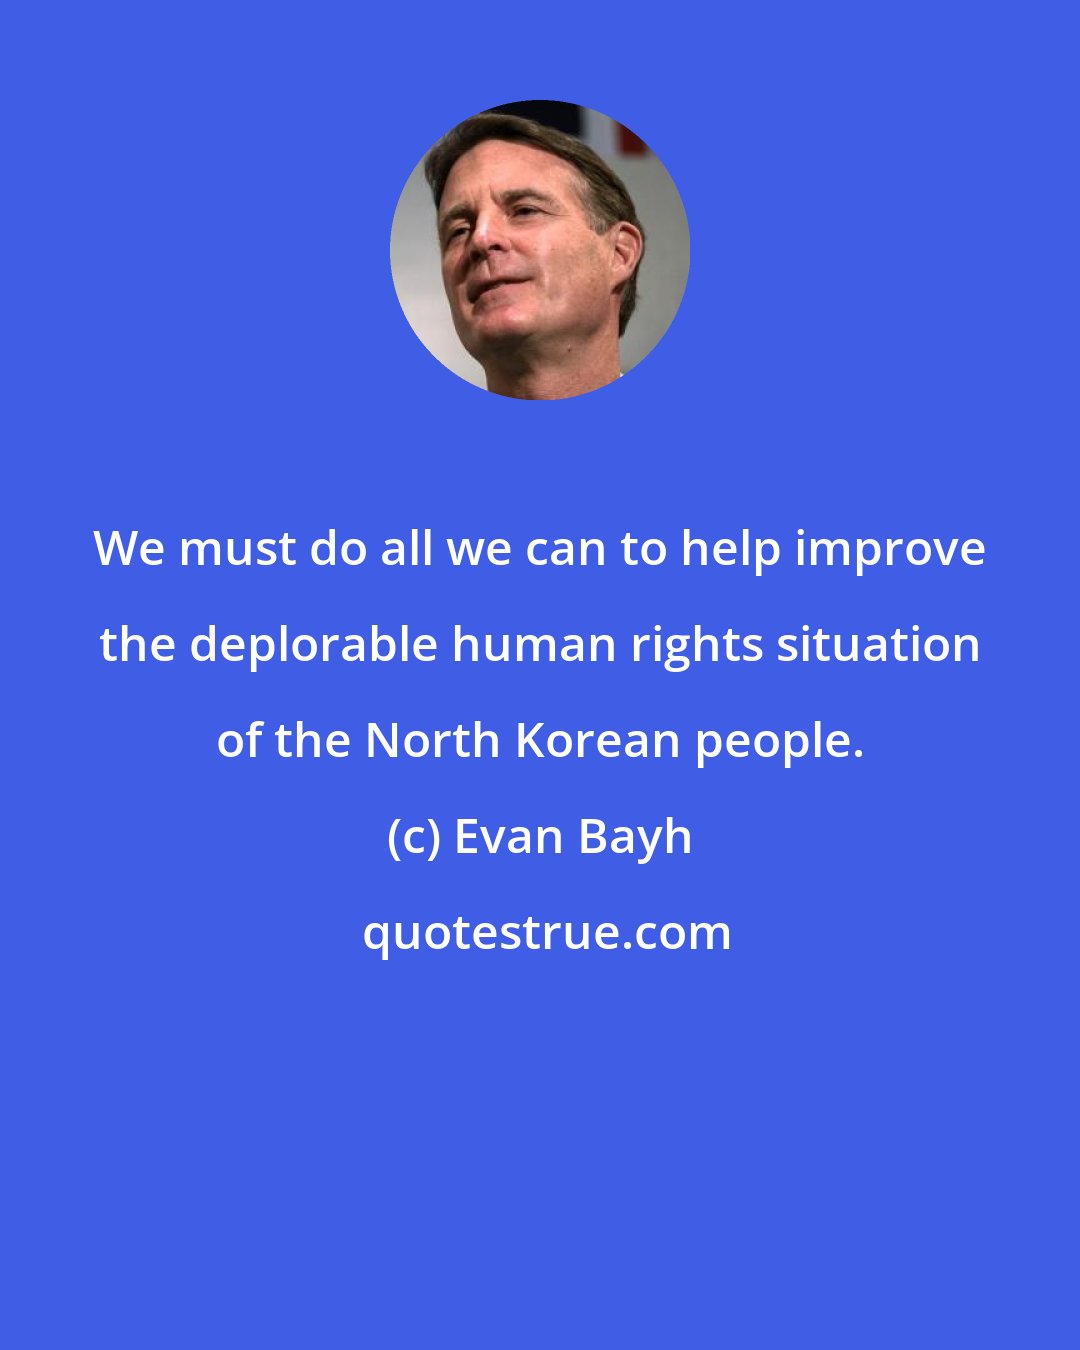 Evan Bayh: We must do all we can to help improve the deplorable human rights situation of the North Korean people.